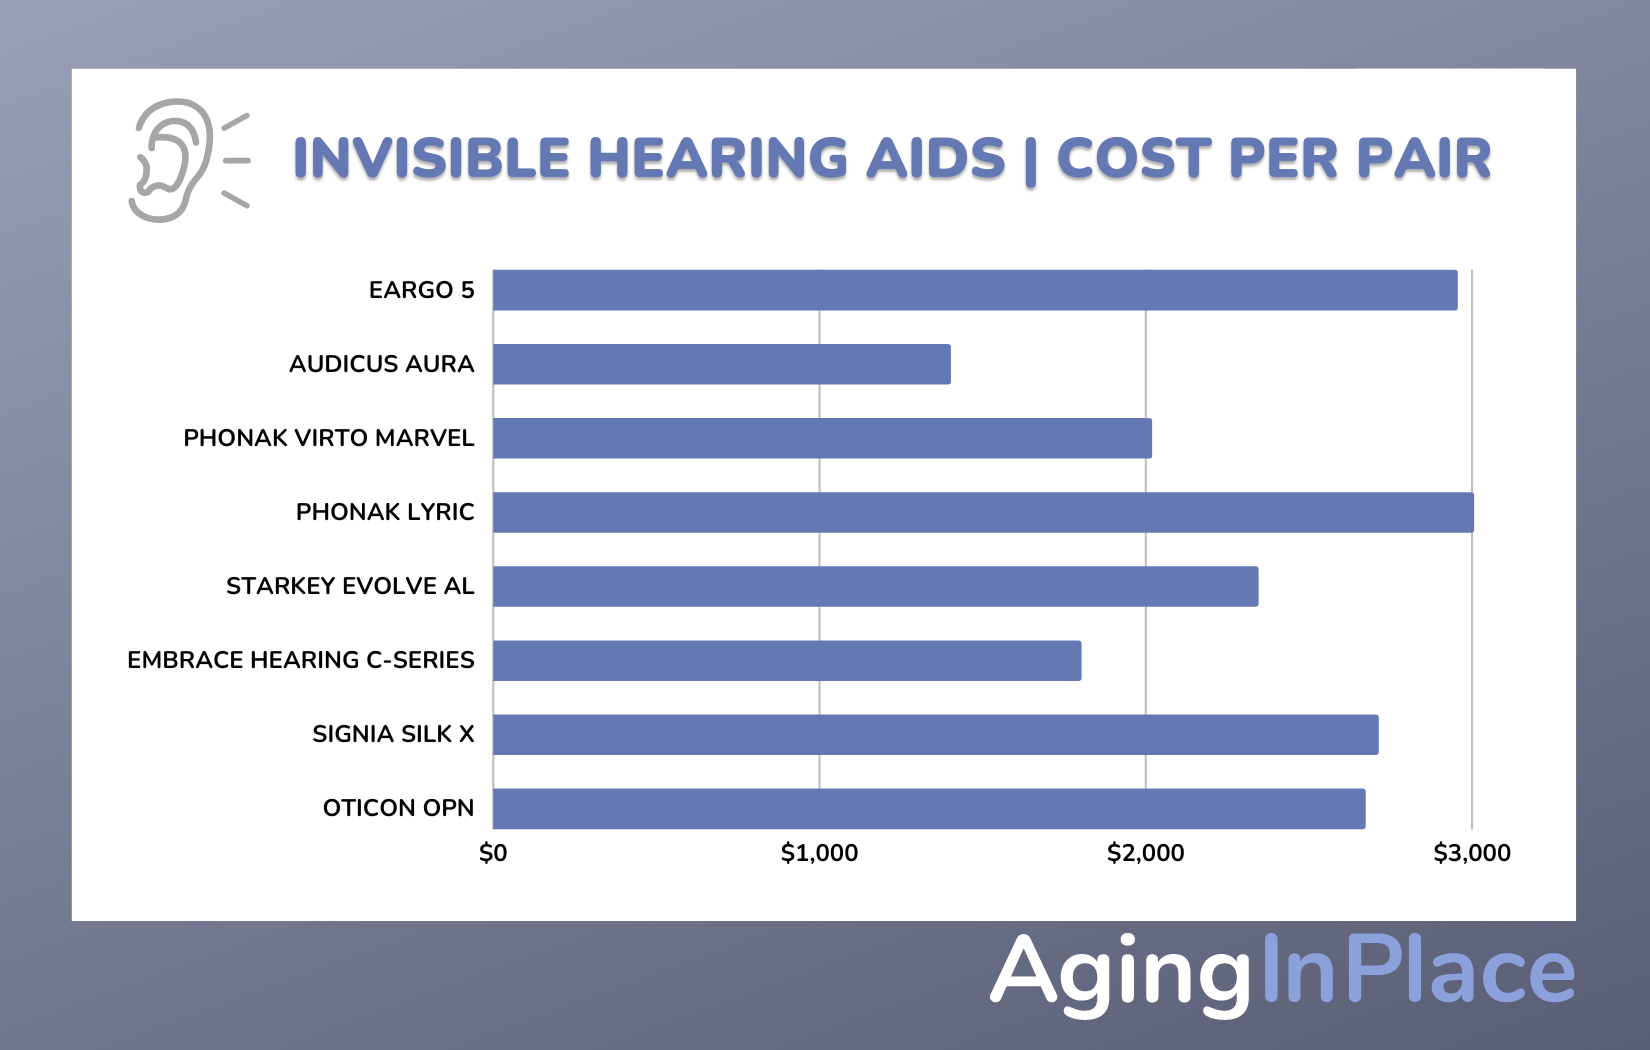 comparison of invisible hearing aids costs